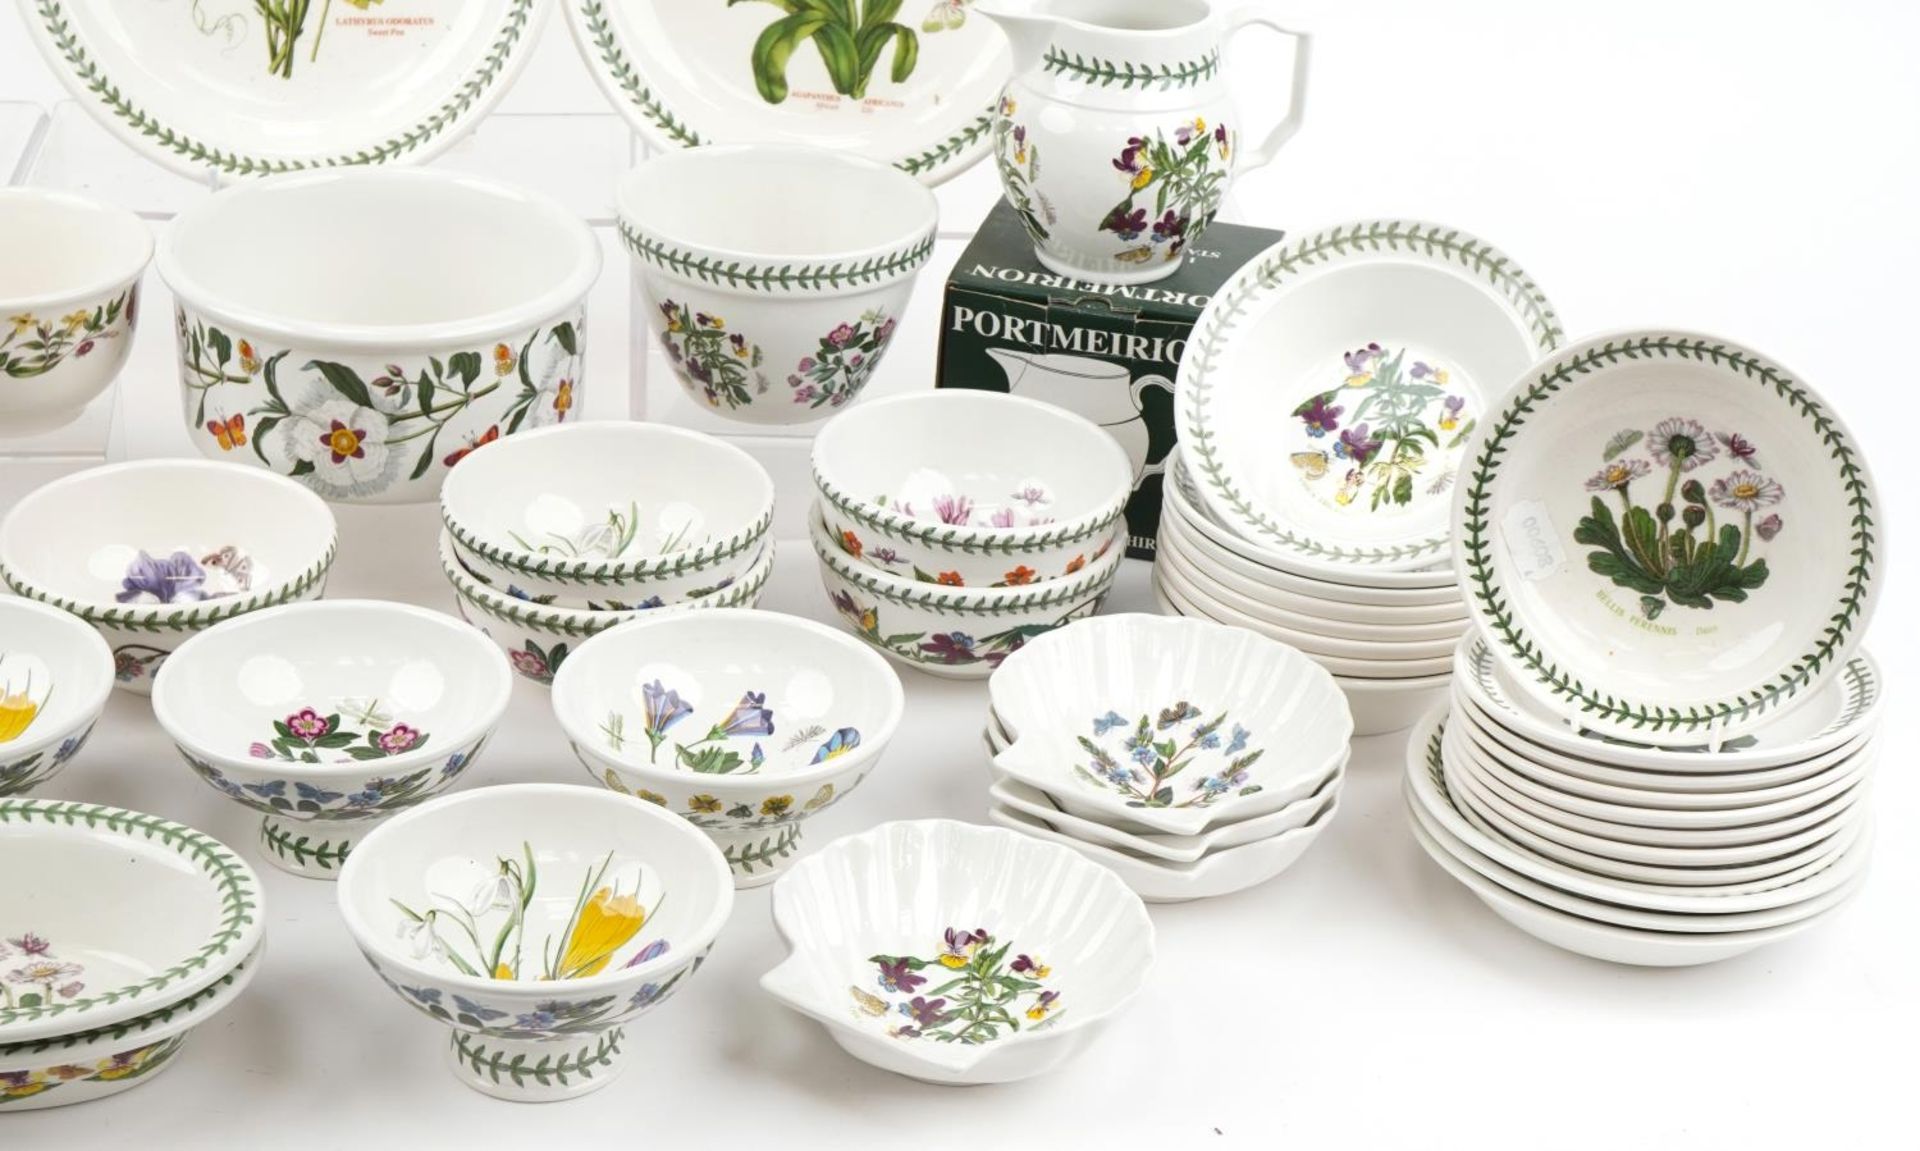 Large collection of Portmeirion Botanic Garden plates, bowls and dishes, the largest 27cm in - Image 10 of 14